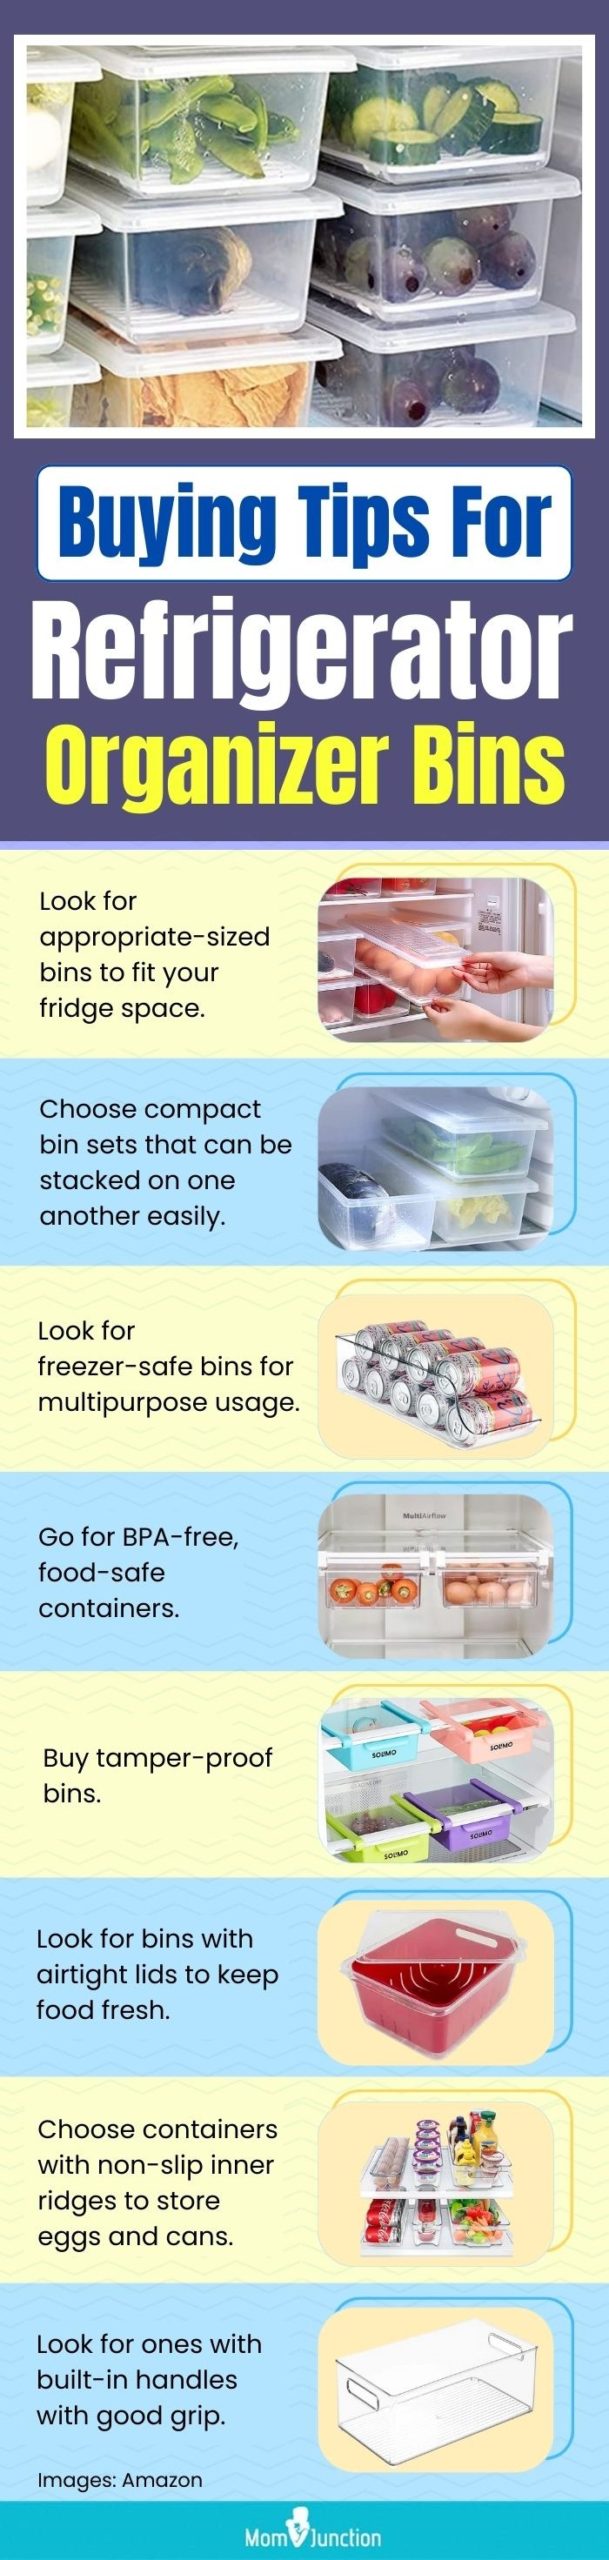 Egg Storage Container for Refrigerator, Vtopmart 2 Pack Egg Holder, Stackable Tray Holds 14 Eggs, Size: 13.5 x 4.3 x 3, Clear